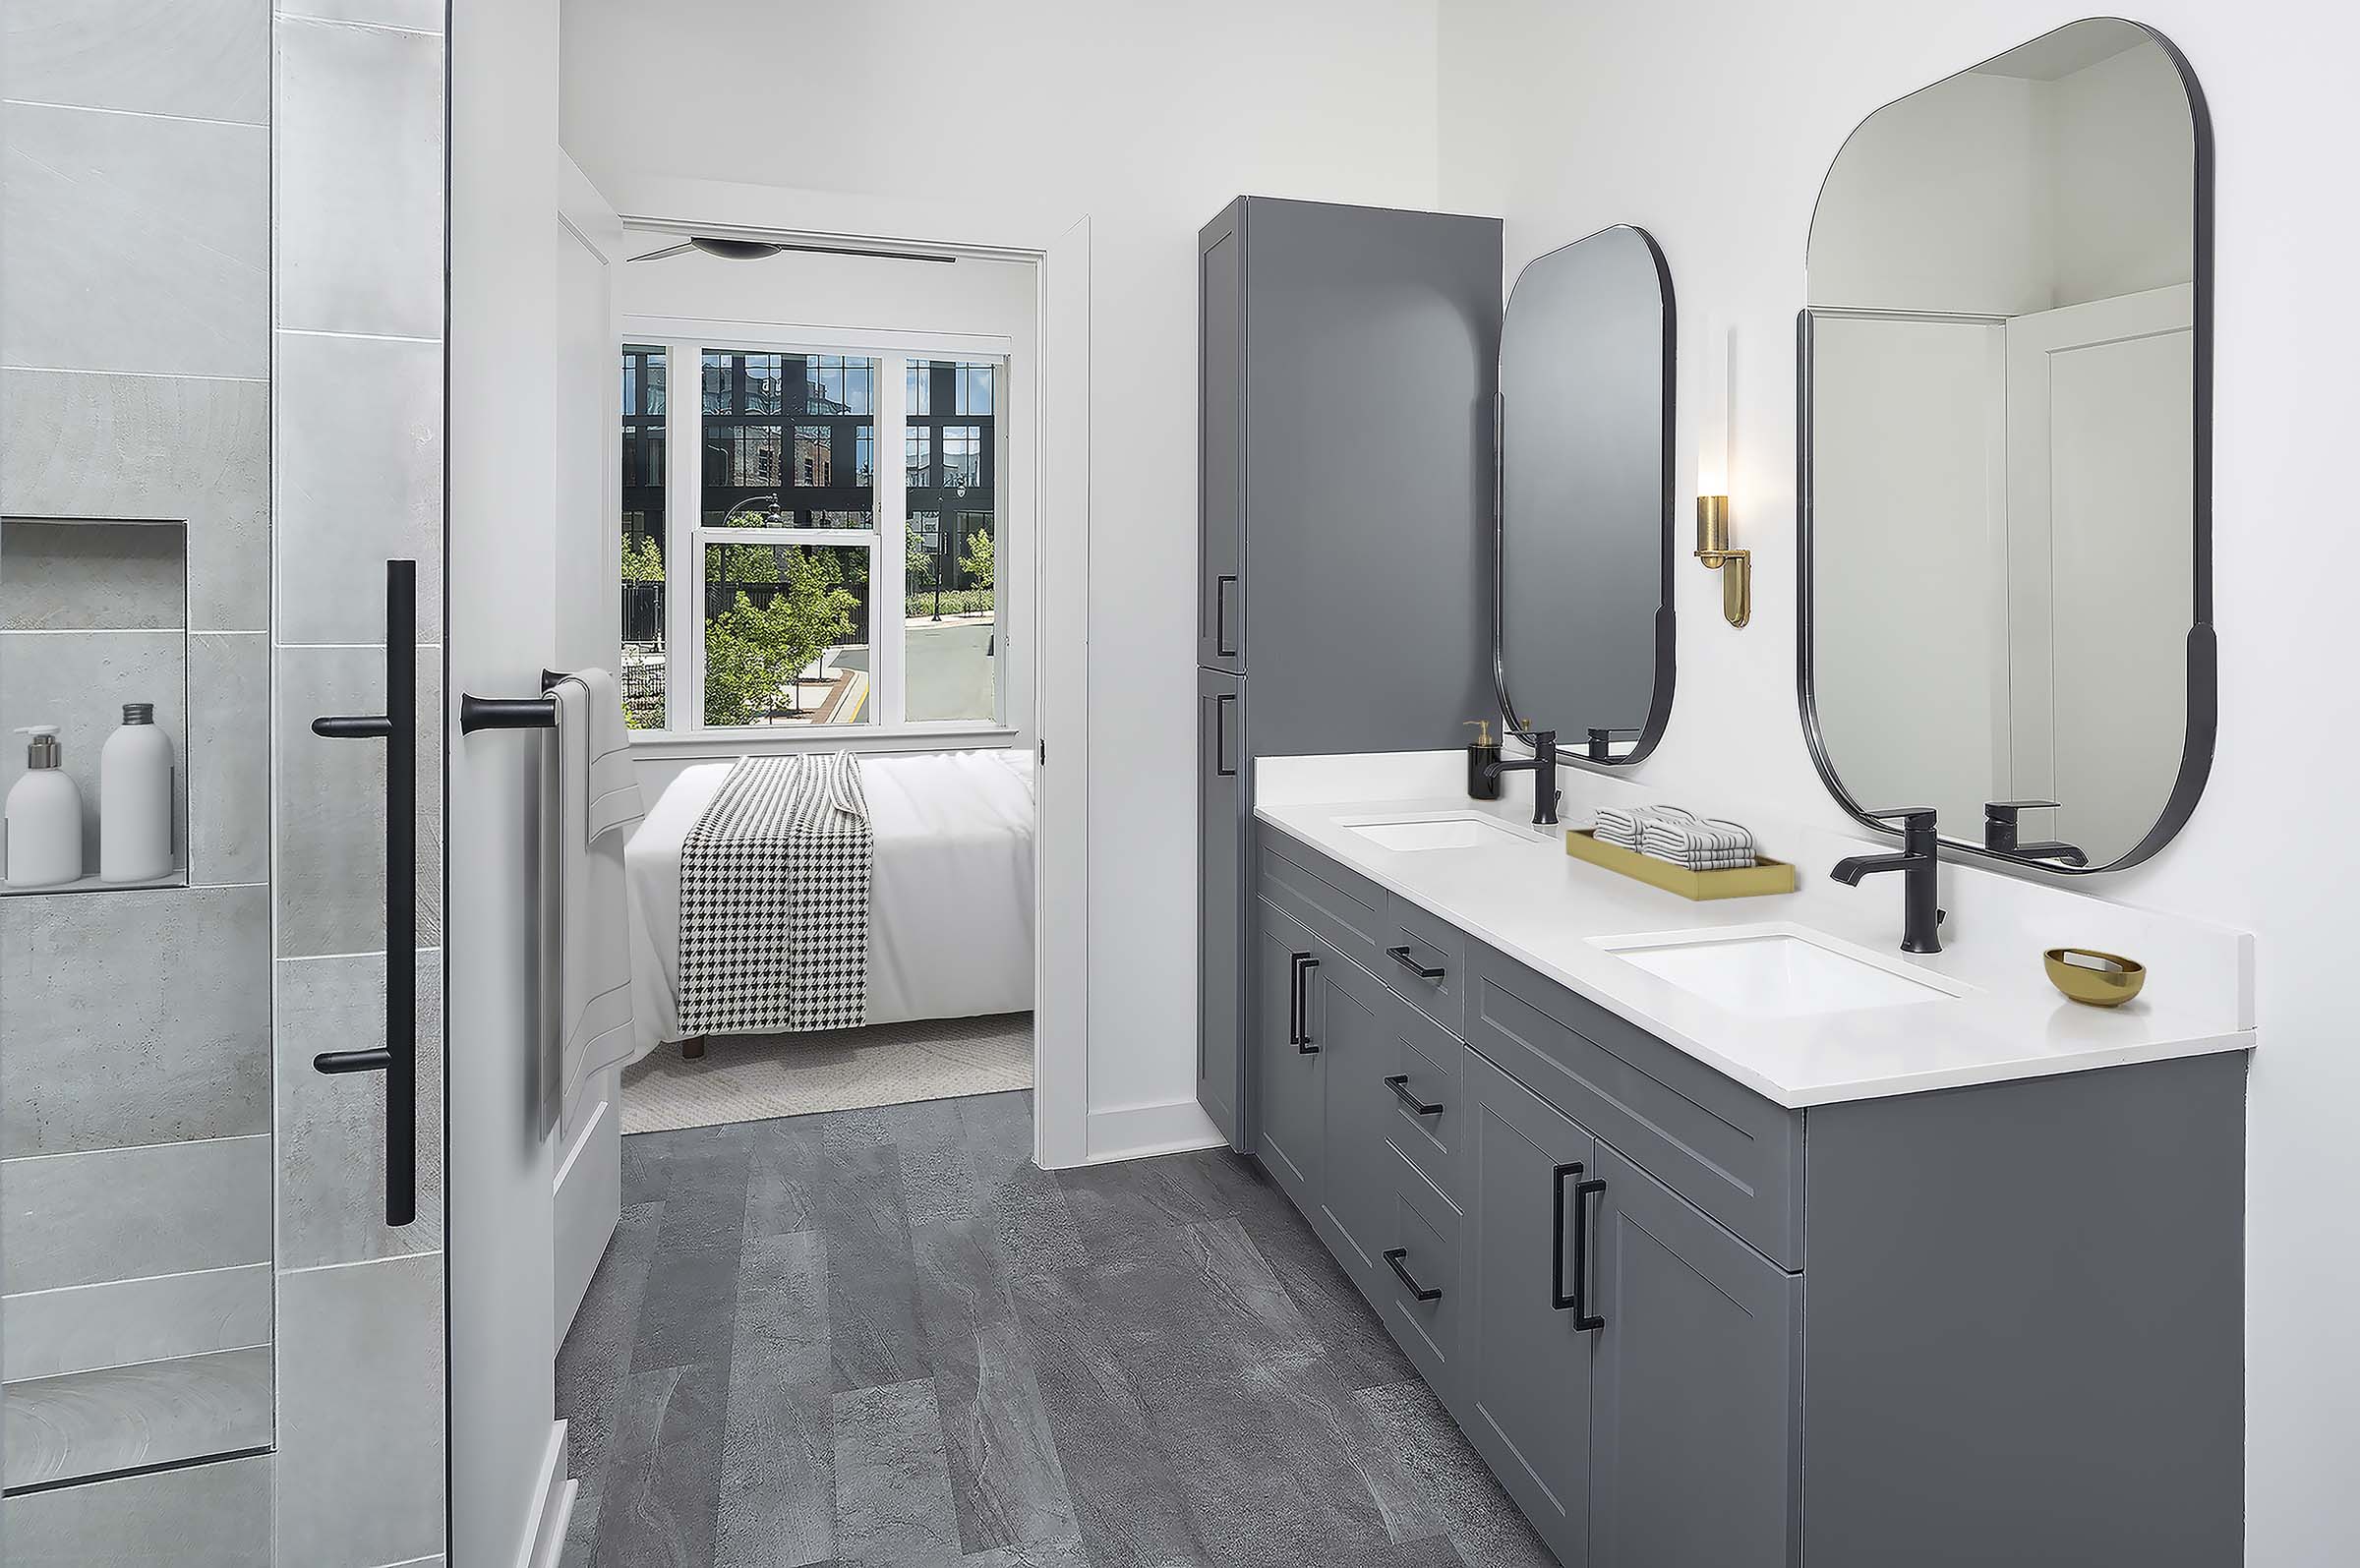 Ensuite bathroom with double vanity, walk-in shower, and wood-style flooring at Camden Durham apartments in Durham, NC.